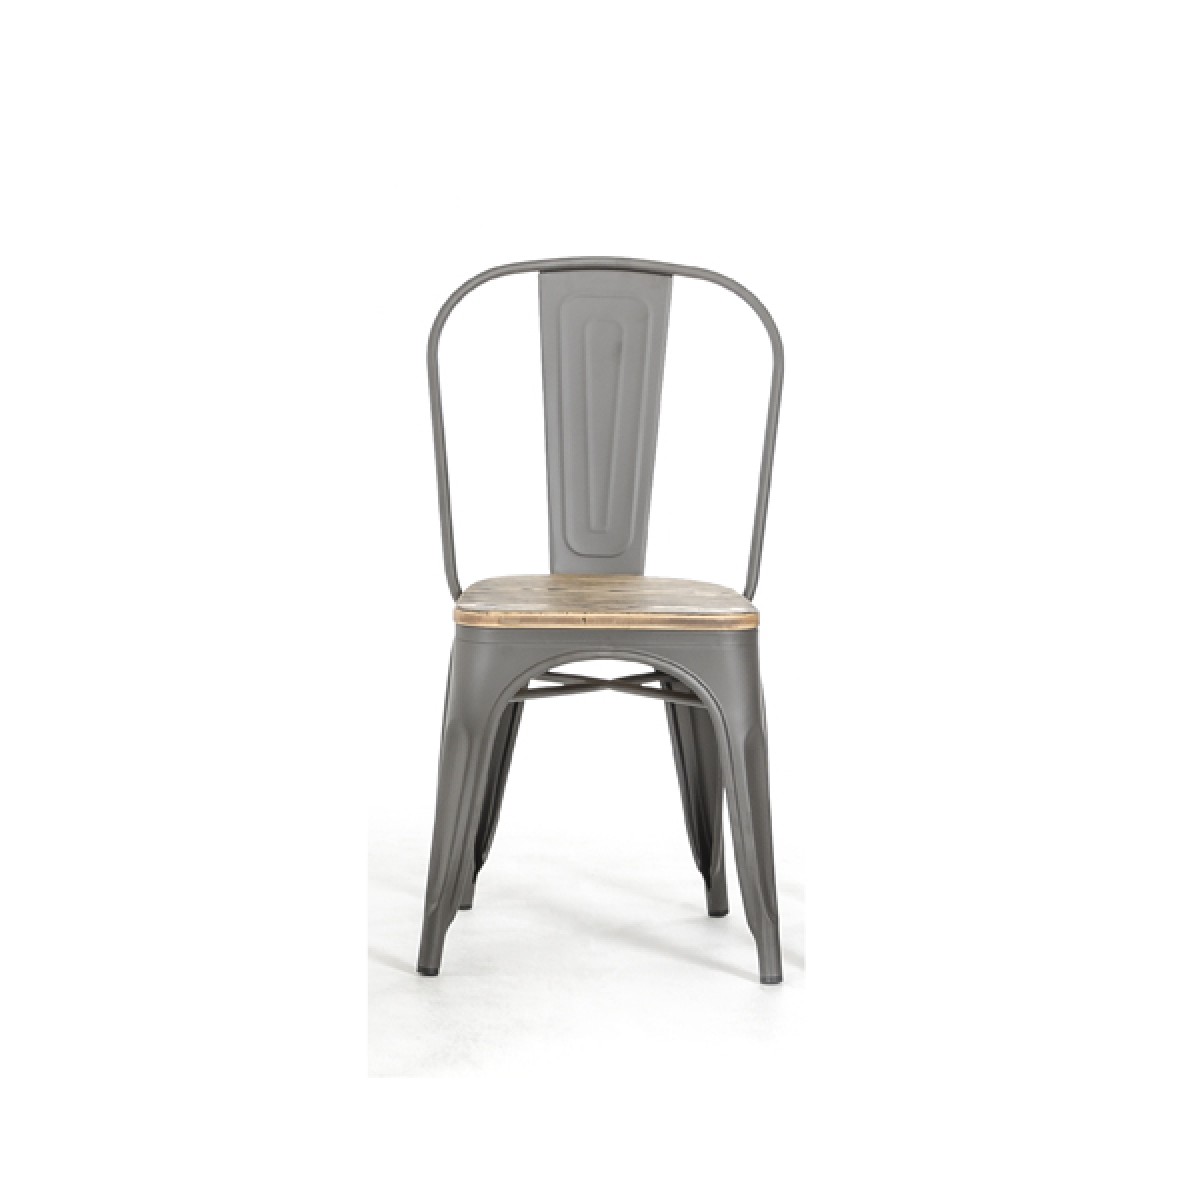 stainless steel wood grain chair tonic